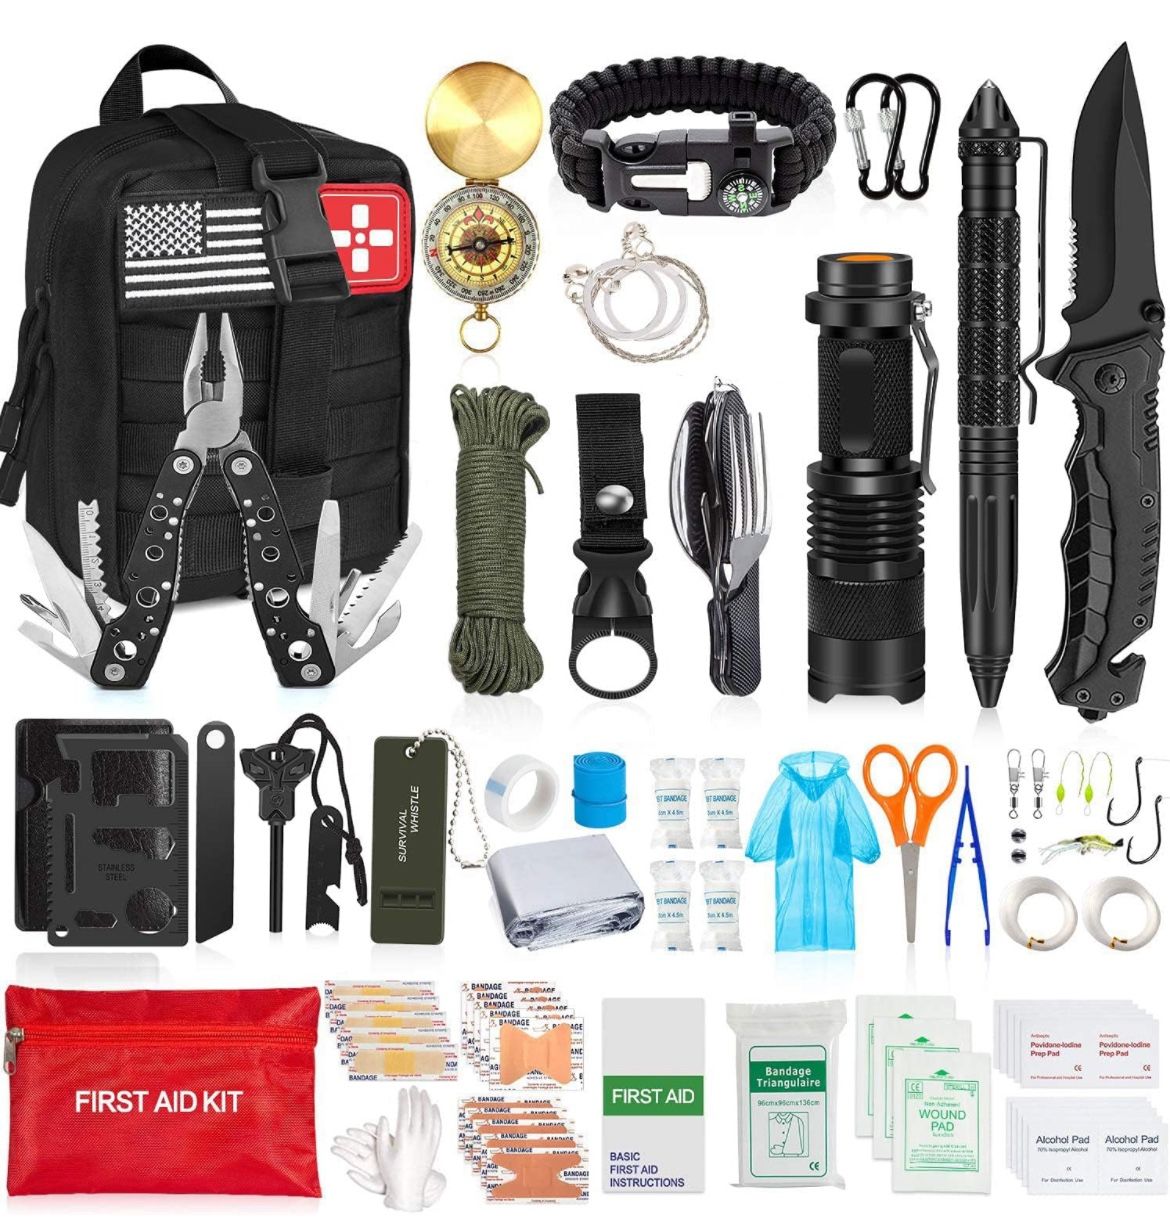 Emergency Survival Kit First Aid Bug out Military Prepper Kit 